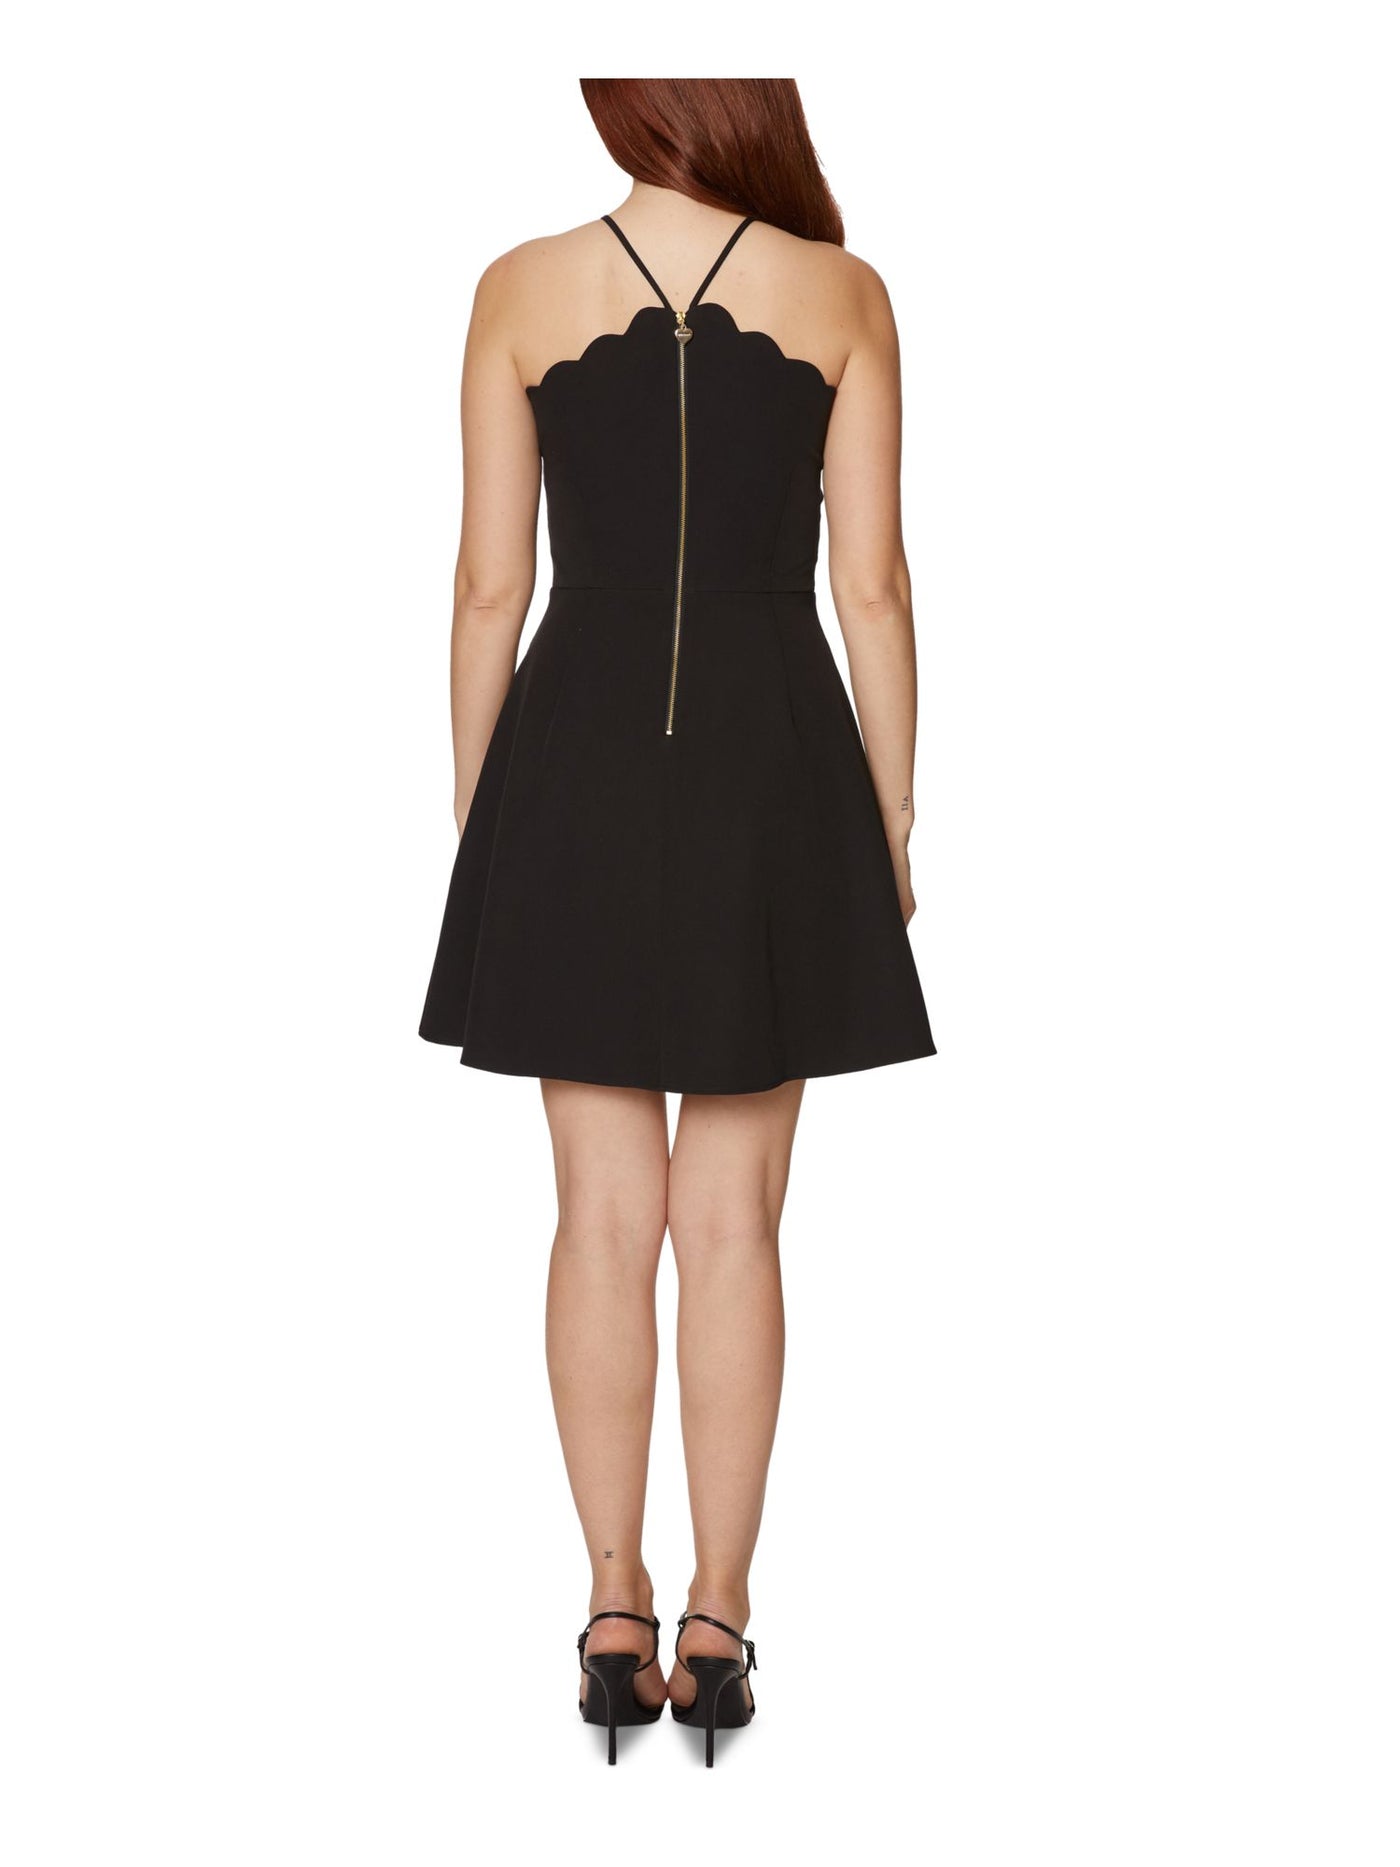 BETSEY JOHNSON Womens Embellished Zippered Spaghetti Strap Square Neck Short Party Fit + Flare Dress